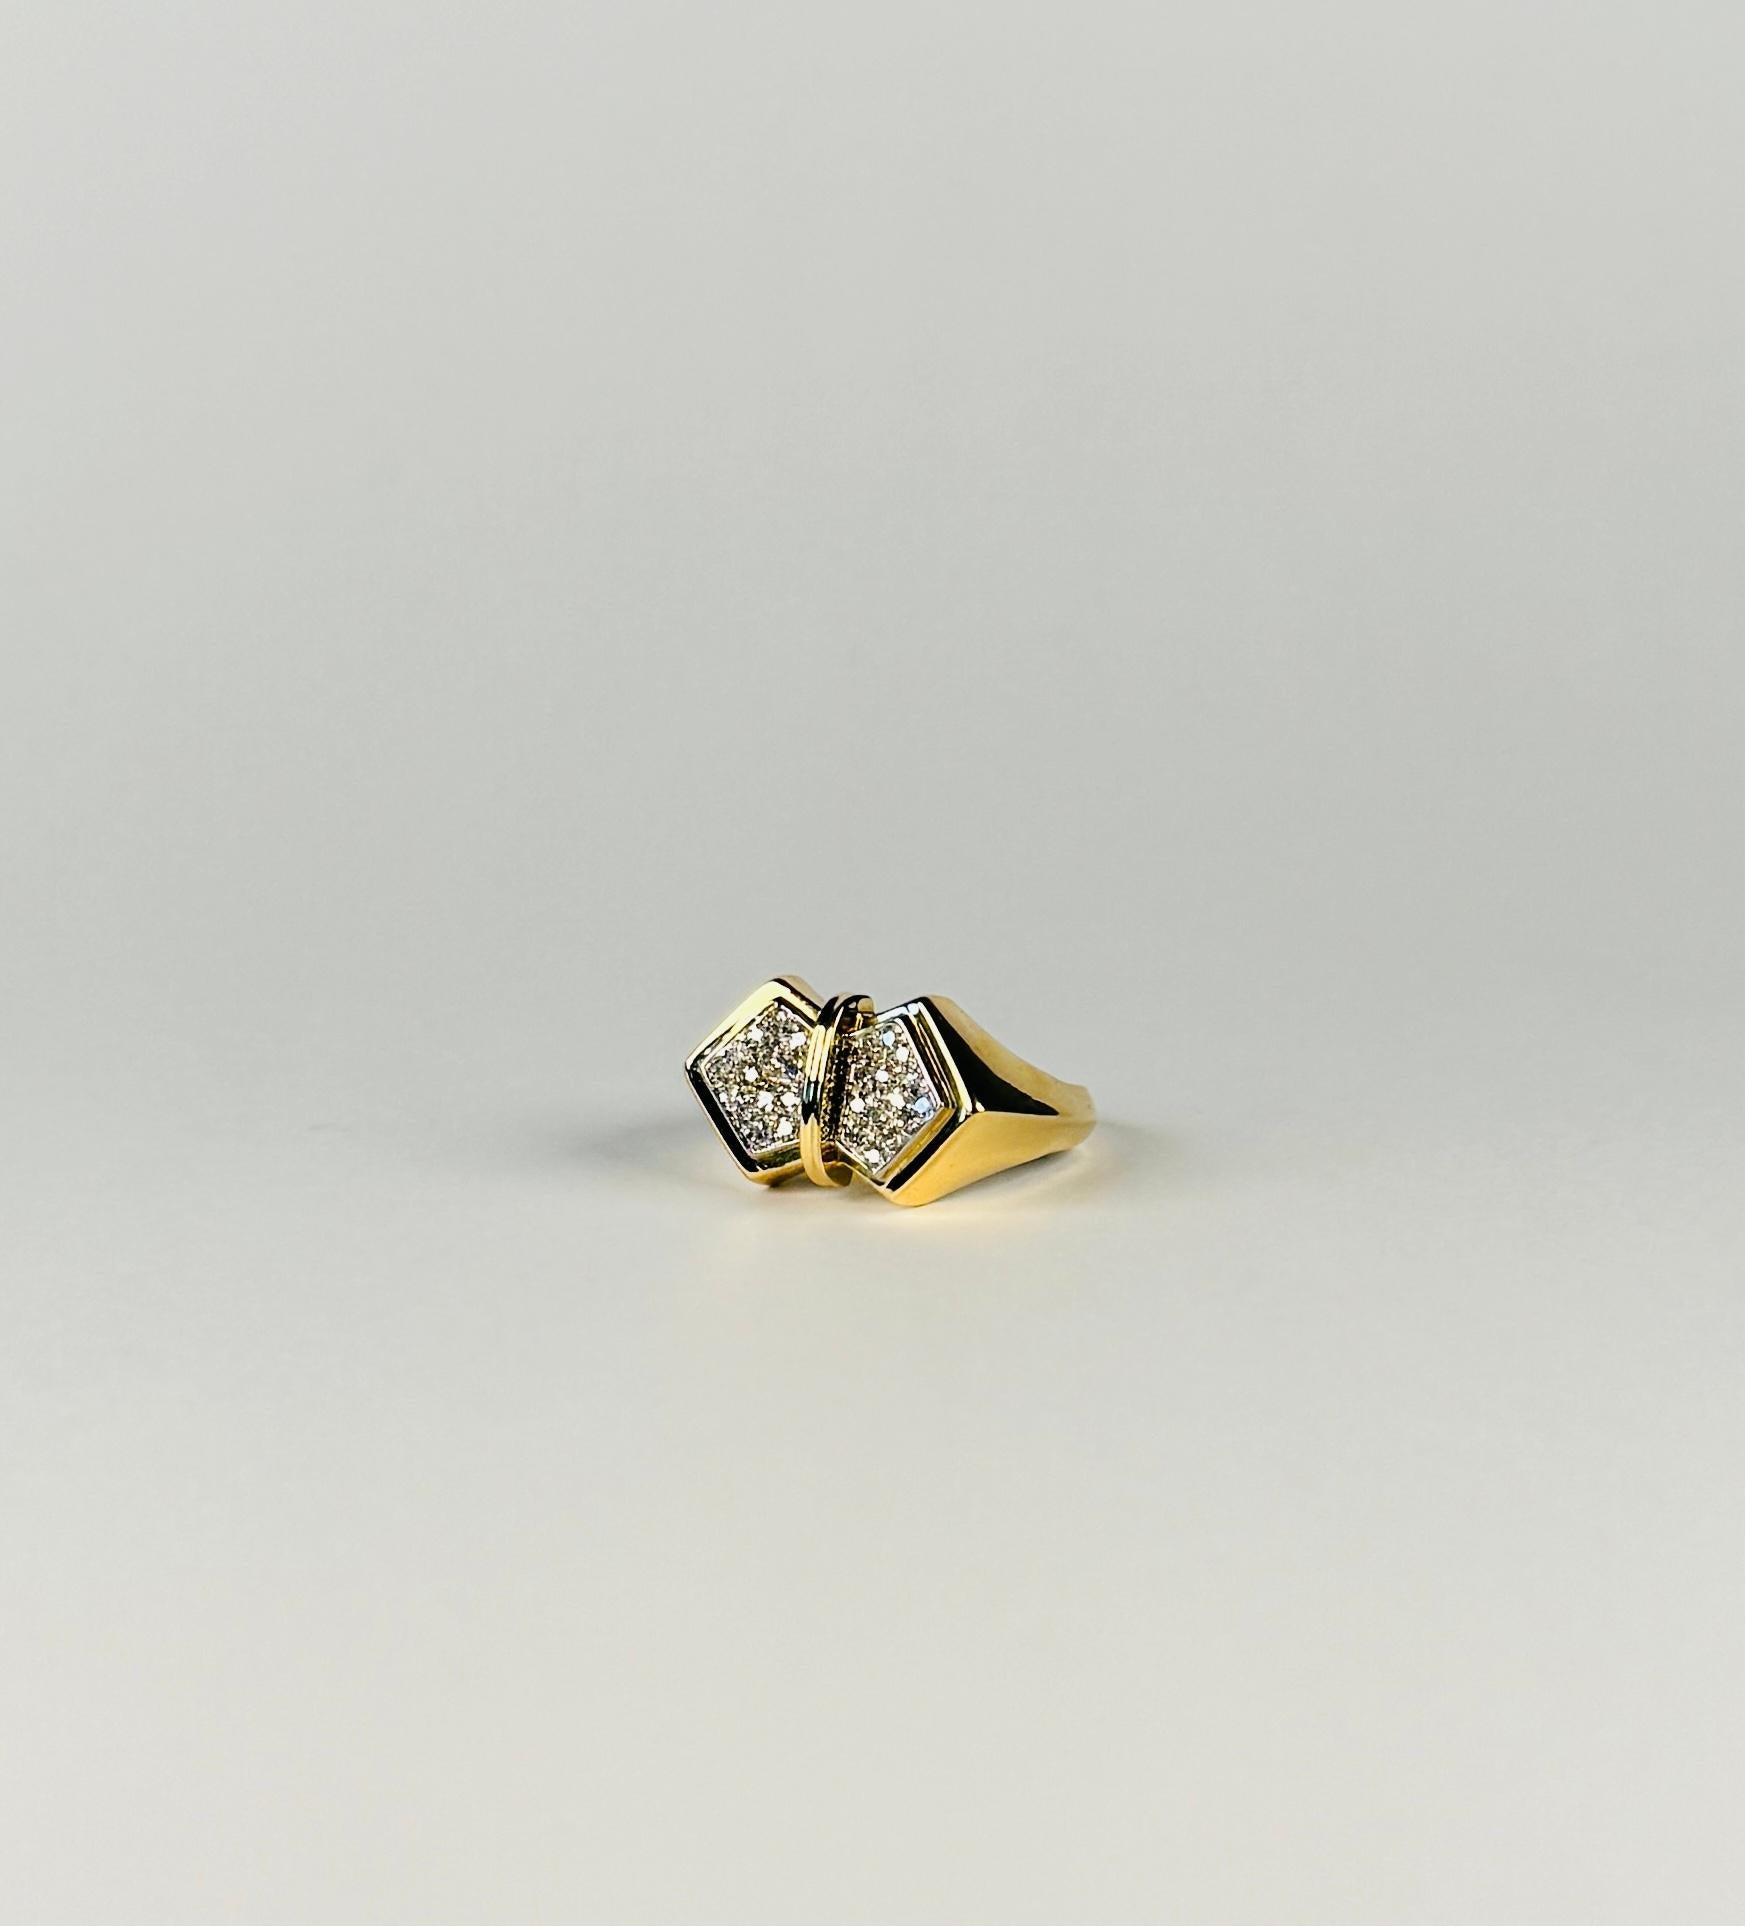 This butterfly ring has an exquisite design & style and is made with absolute craftsmanship. Its captivating design showcases 28 single cut diamonds. This ring with an Italian origin is made 18 carat yellow gold. The combination of this design and